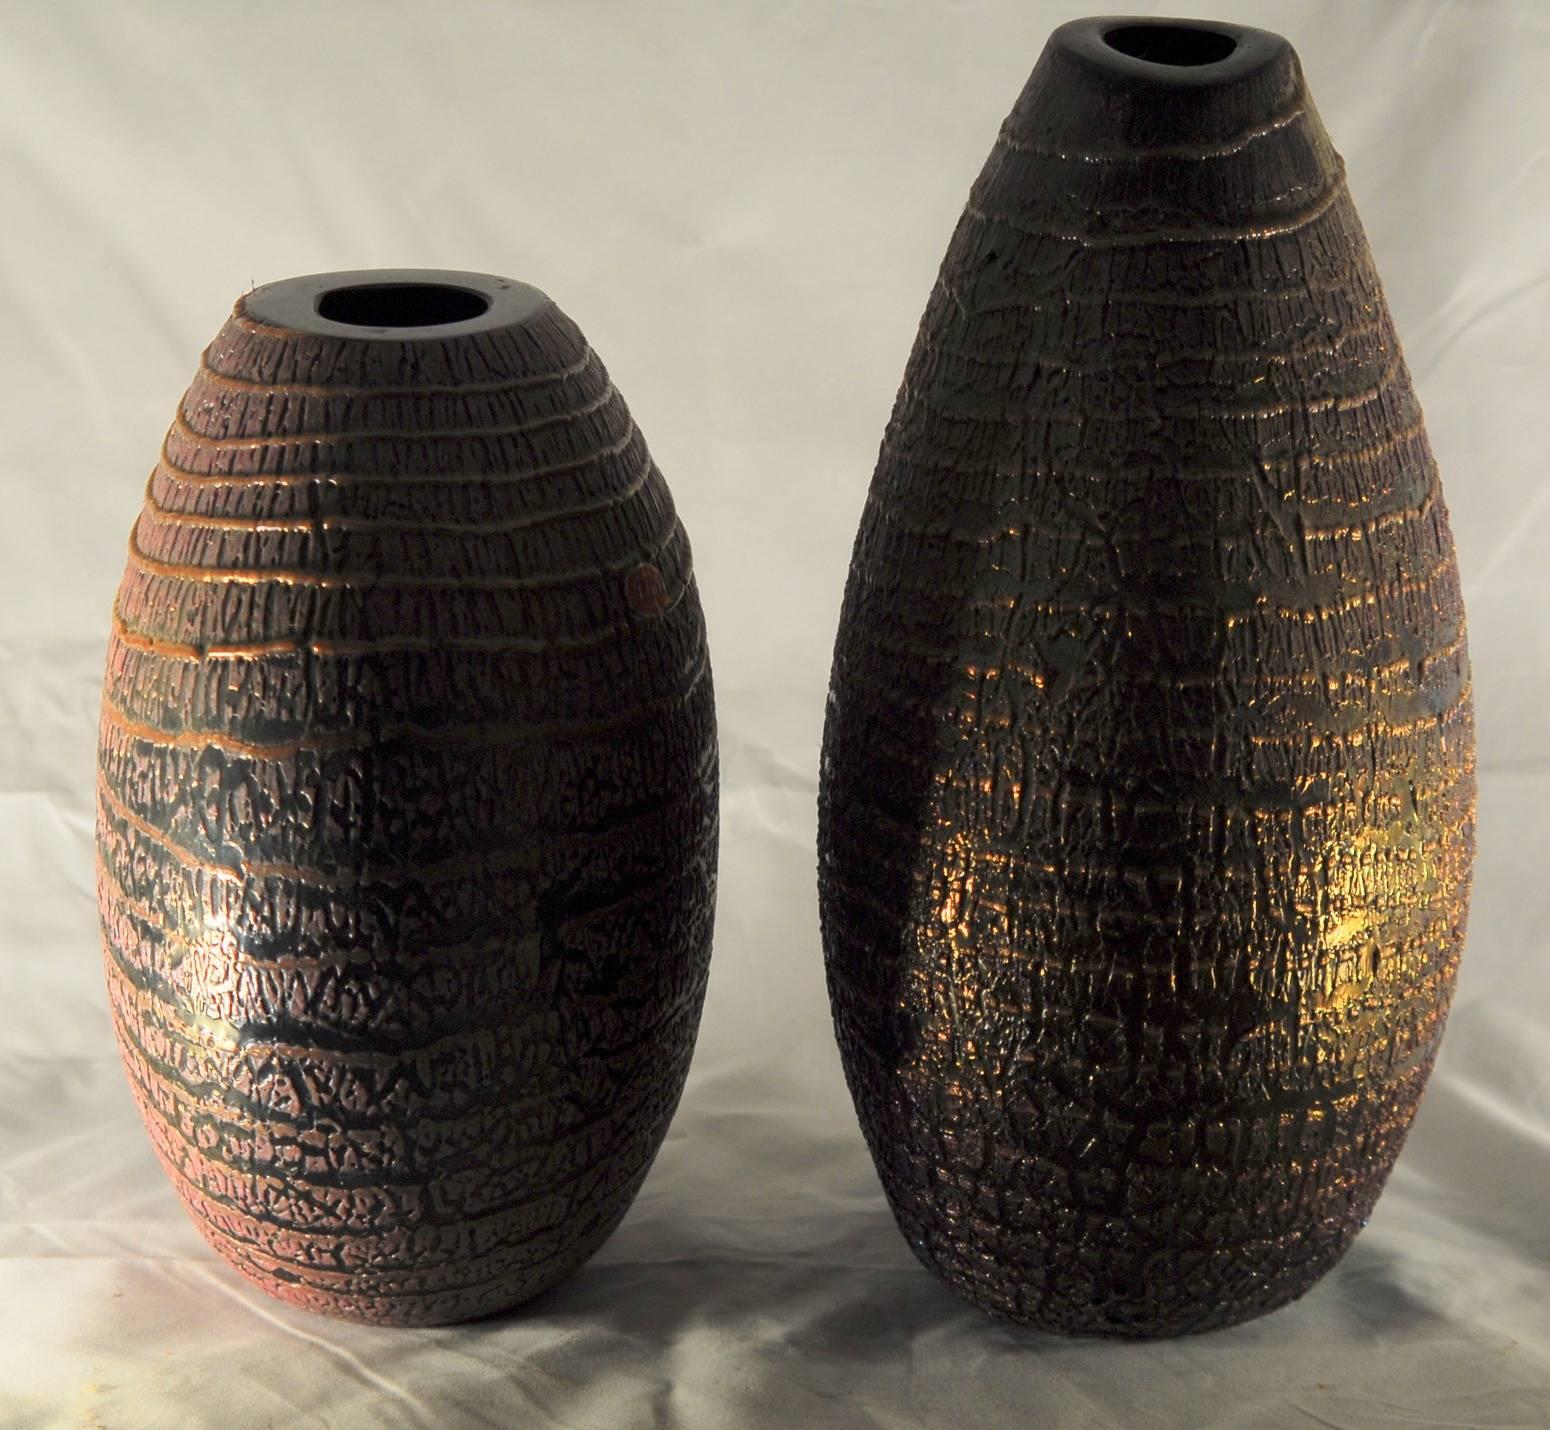 Pair of Crackled Black Iridescent Vases with Avventurina Stripe by Sergio Rossi For Sale 2